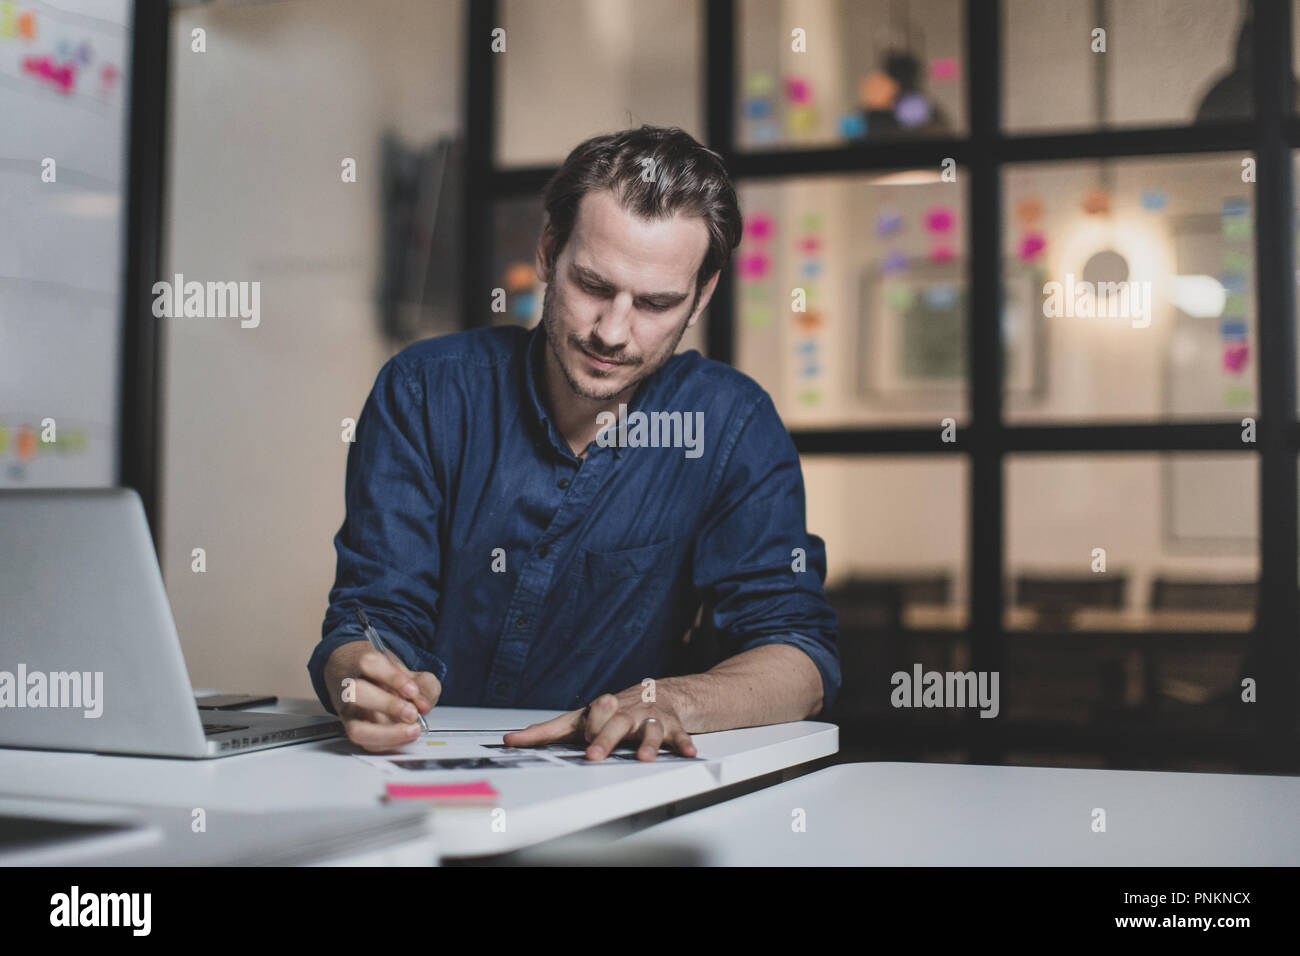 Adult male working late in an office Stock Photo